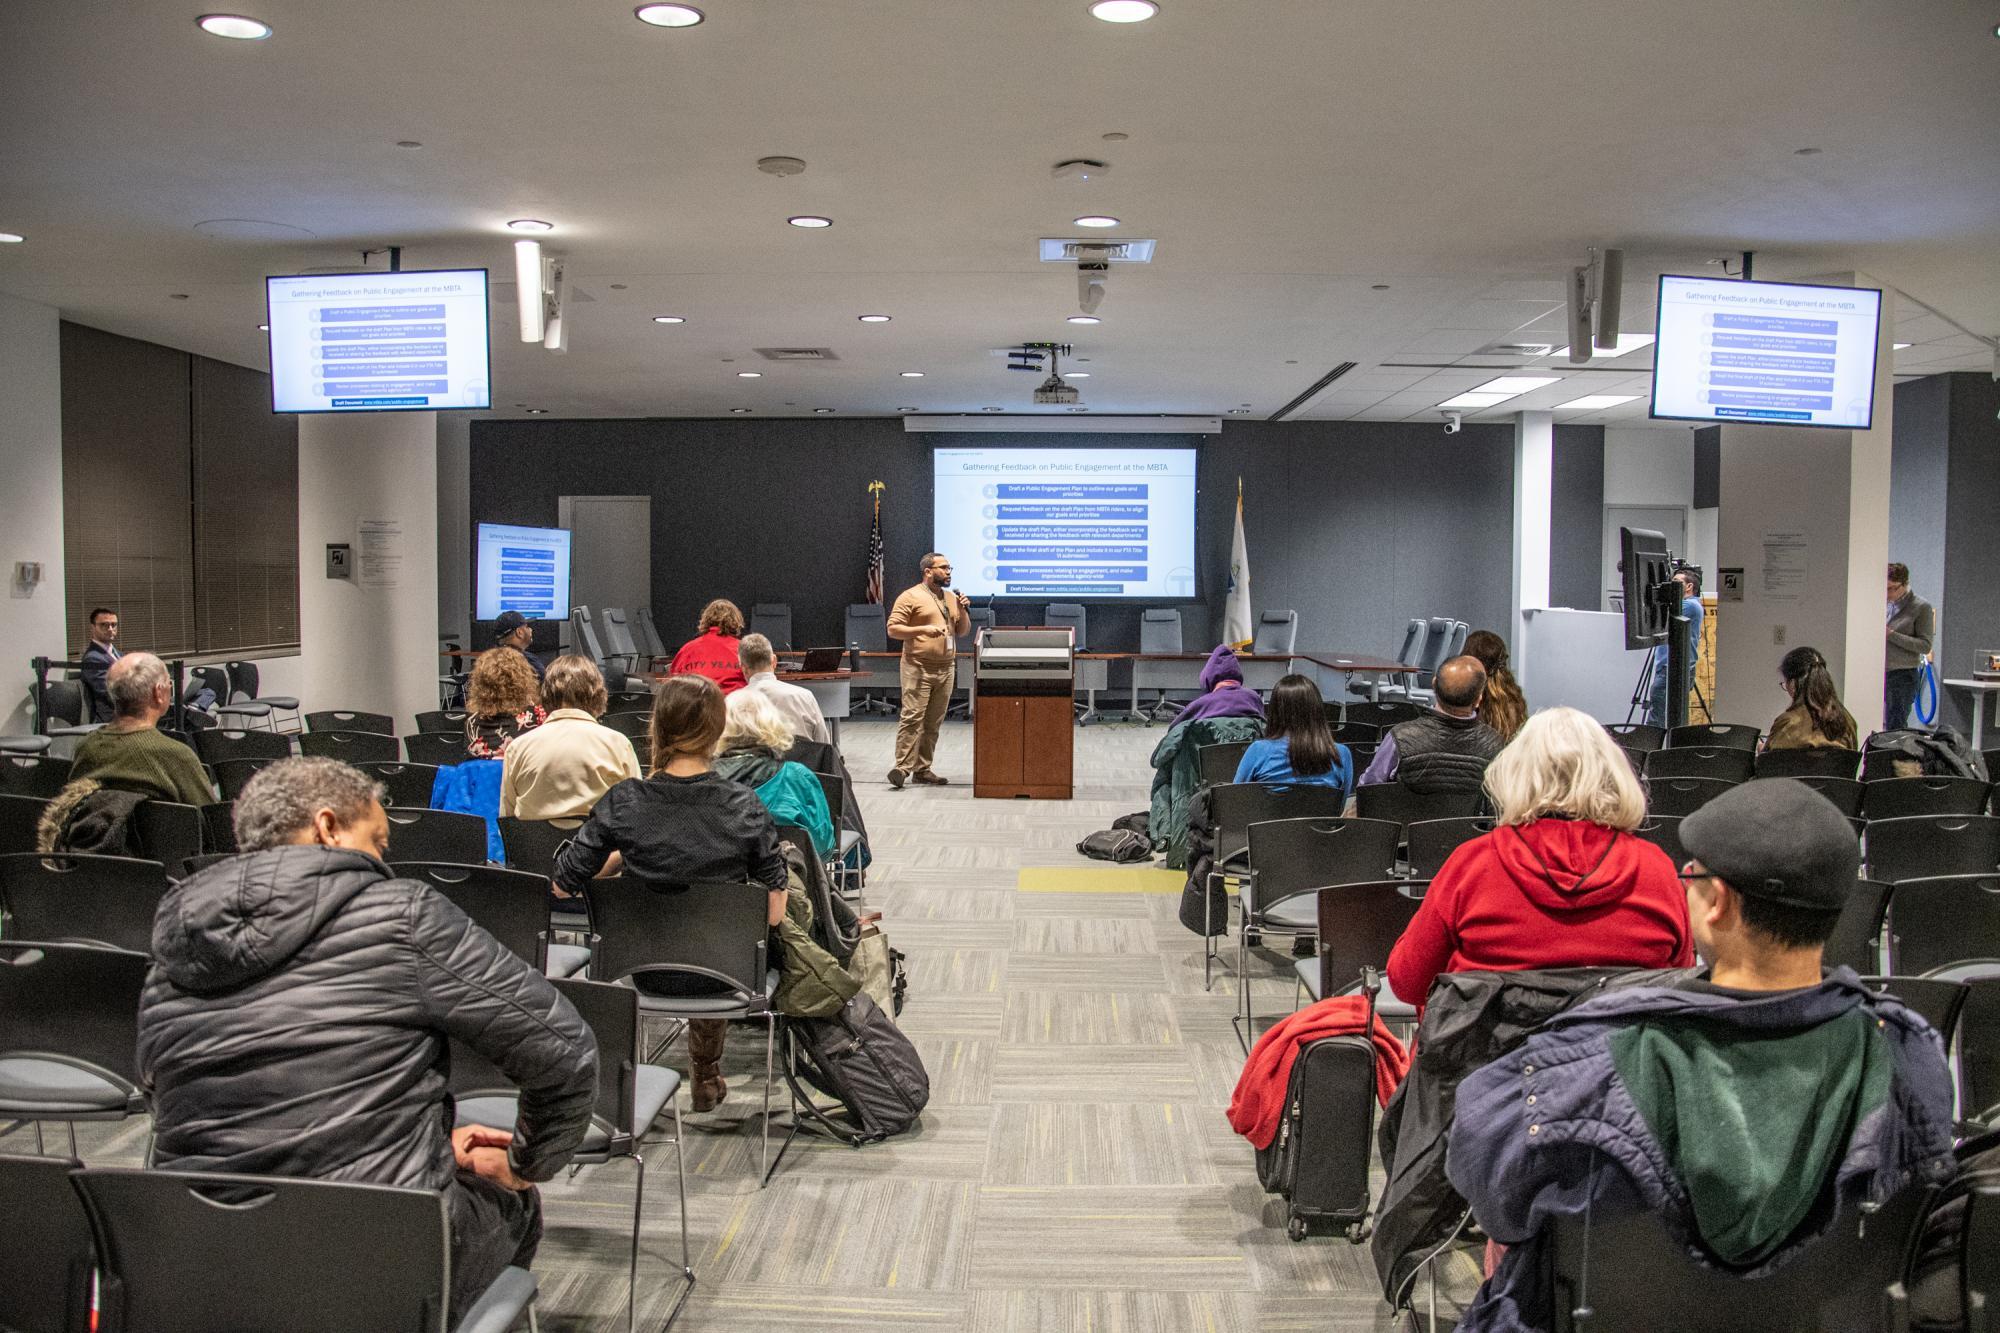 Community members at a public meeting at the State Transportation Building, with 3 screens showing meeting presentation slides and a speaker at the front.